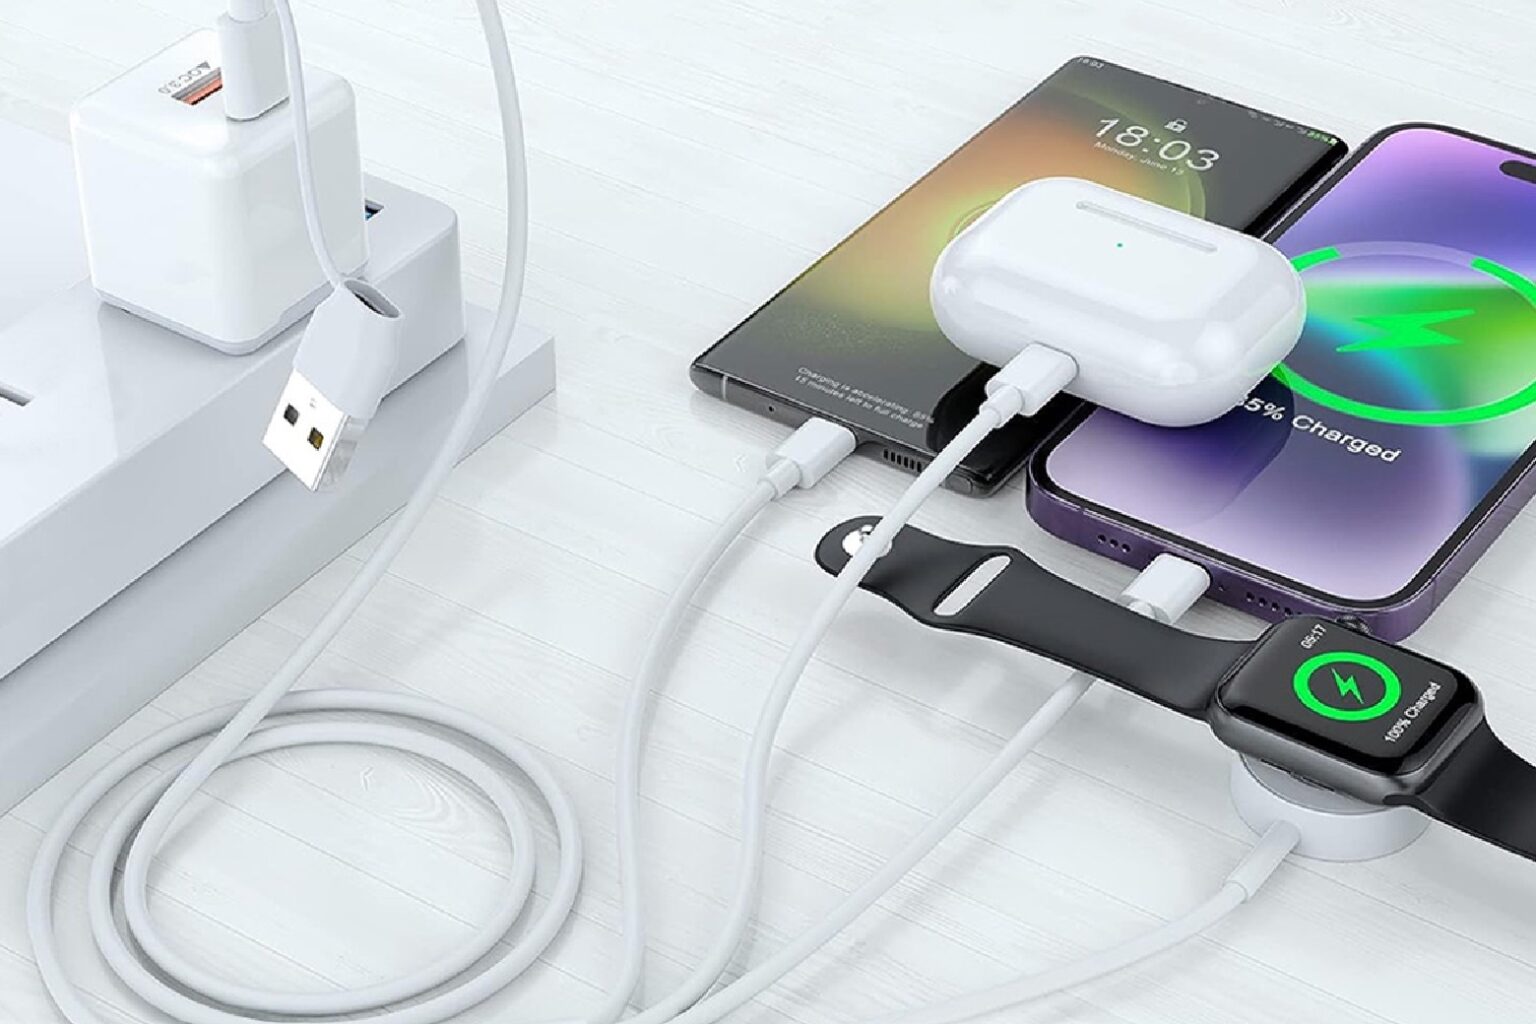 Score this multi-purpose charging cord for all your Apple devices, now only $19.99.